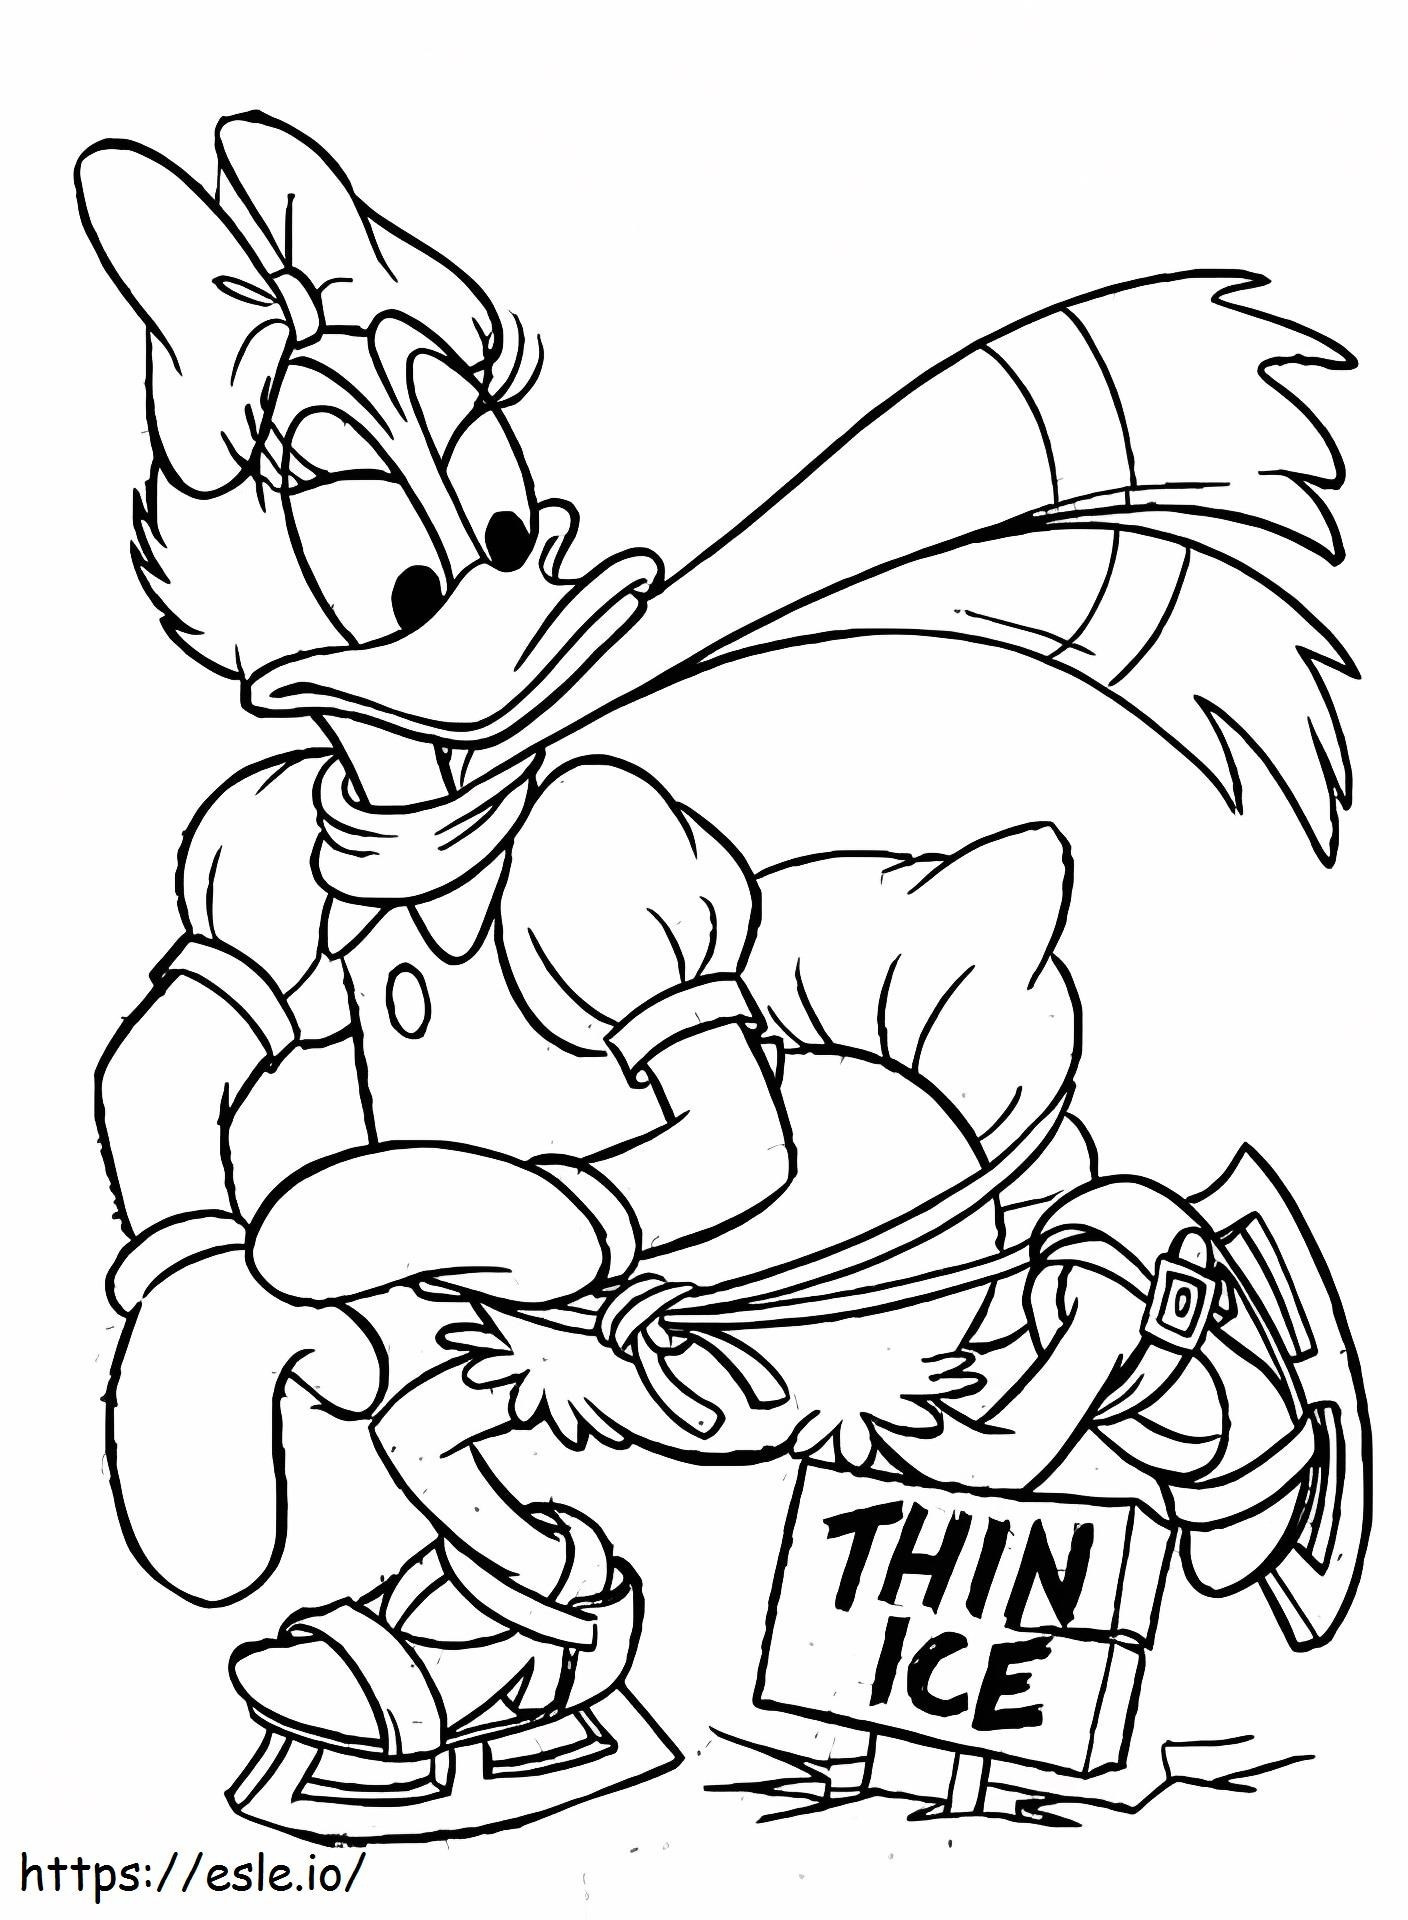 Daisy Duck Ice Skating coloring page